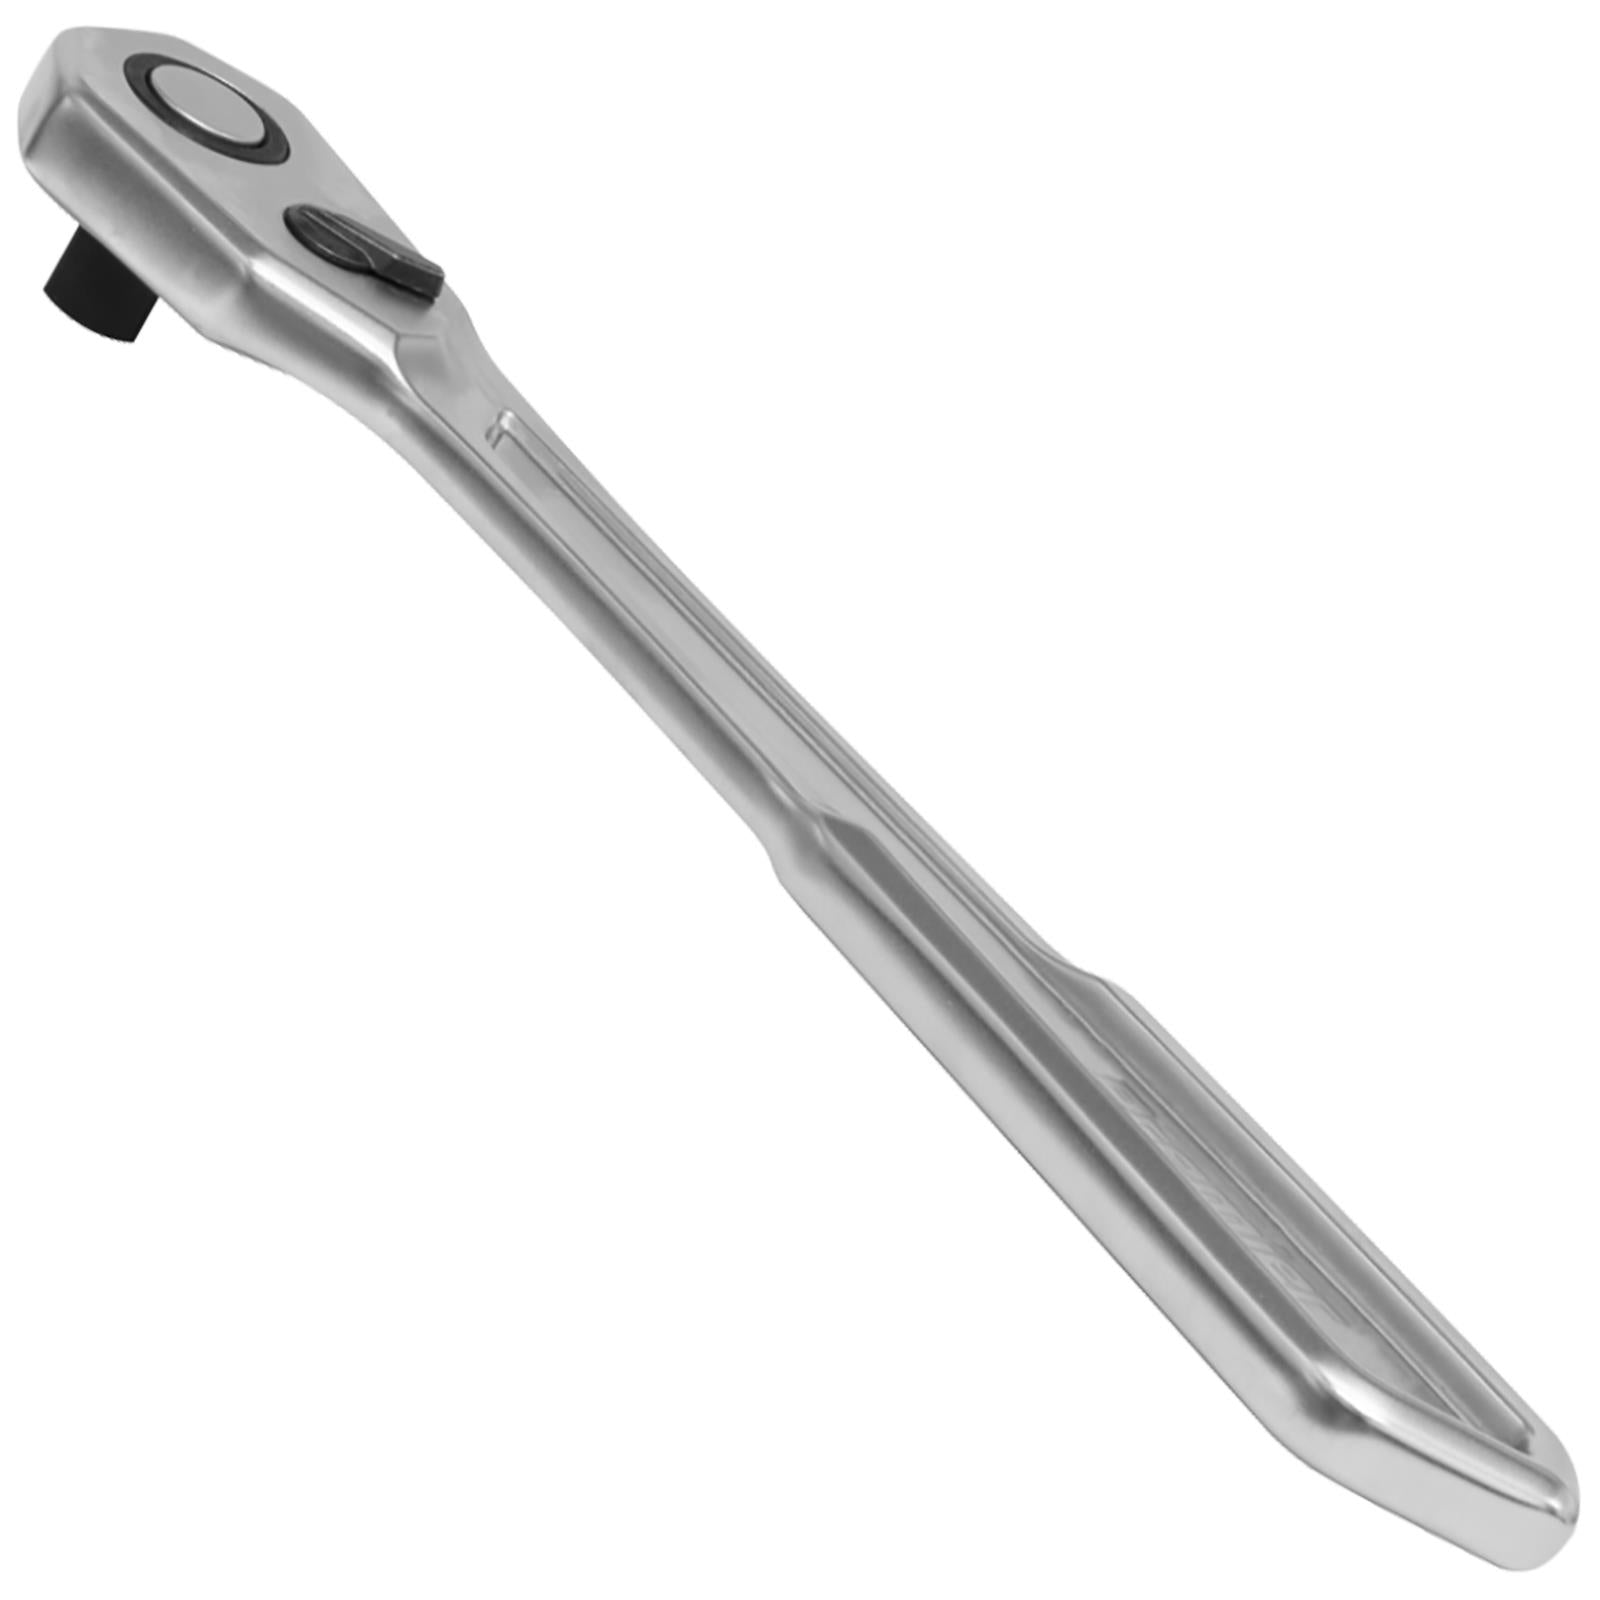 Sealey Premier Ratchet Wrench Low Profile 1/4" Drive Flip Reverse 90 Tooth